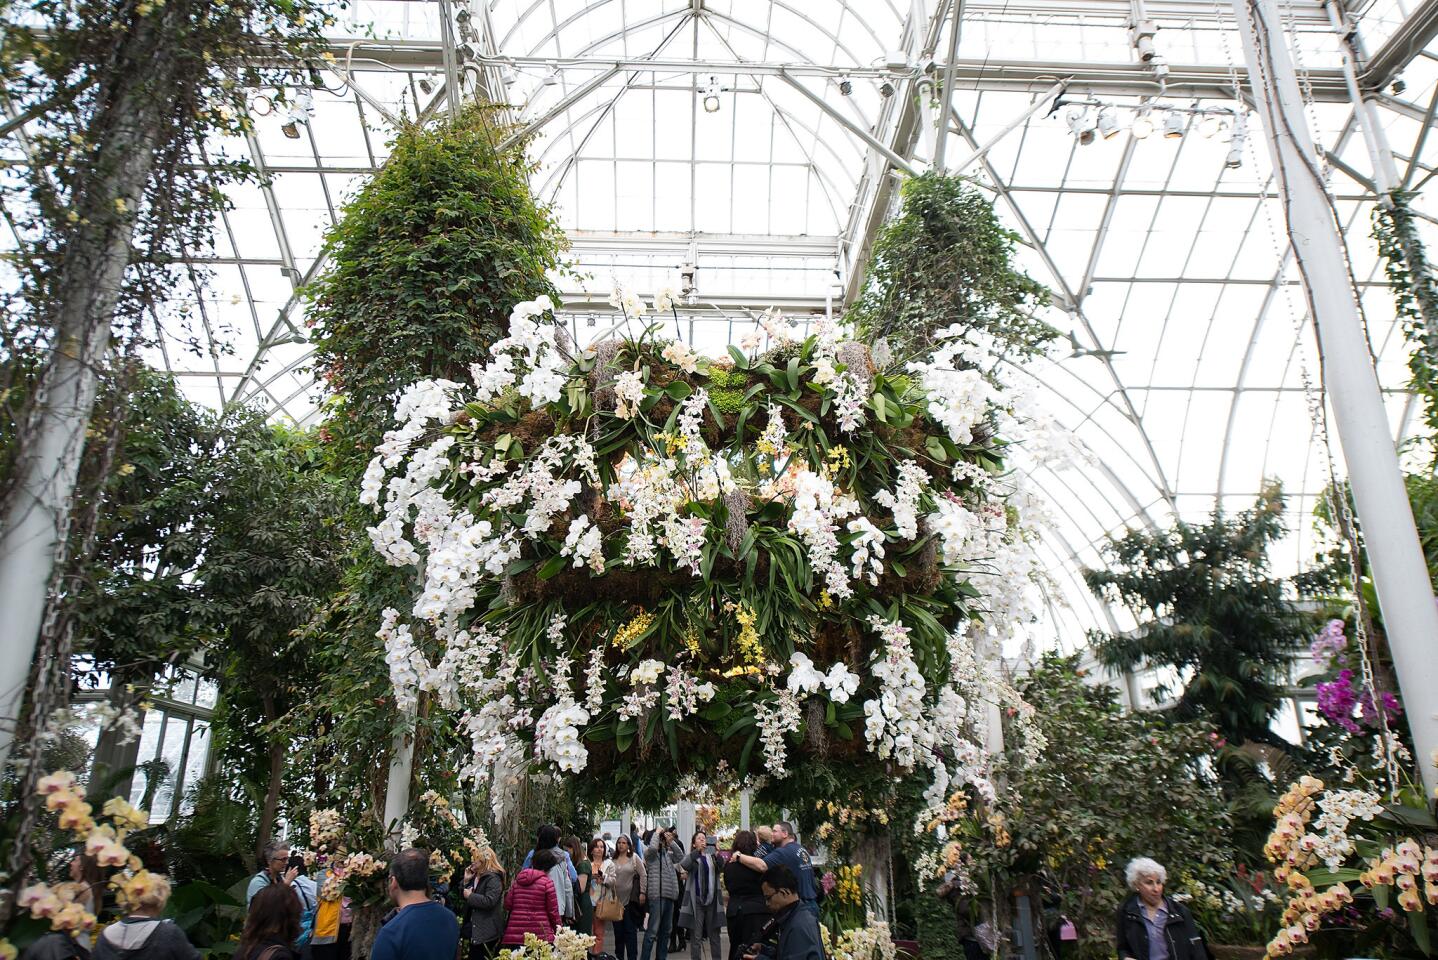 "The Orchid Show: Chandeliers" at New York Botanical Garden on April 5, 2015, in the Bronx borough of New York City.